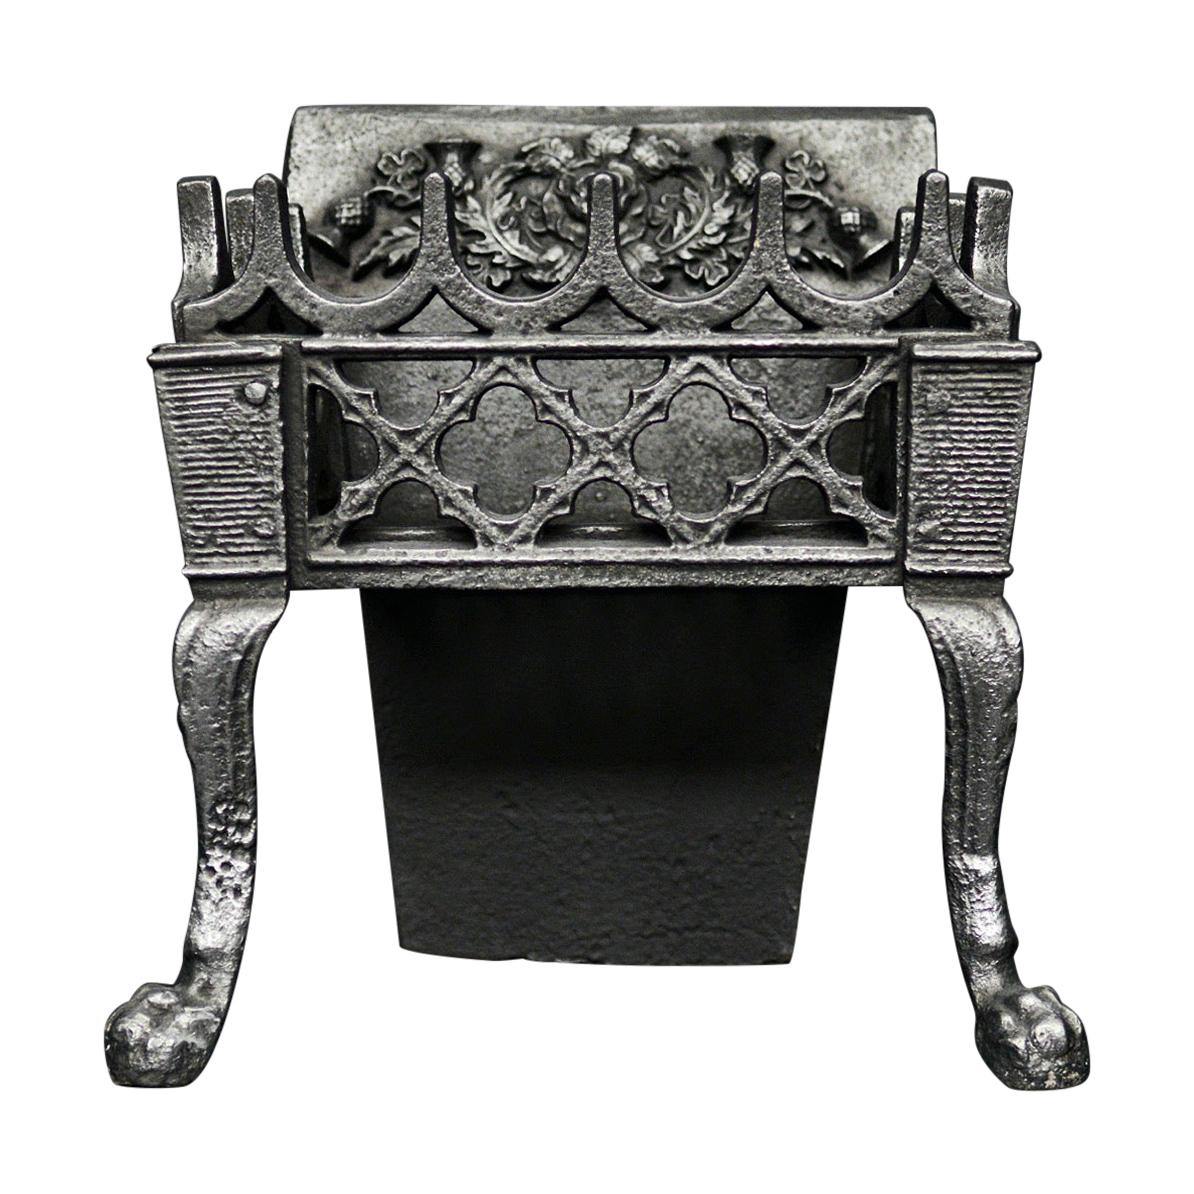 Neo-Gothic Style Firegrate